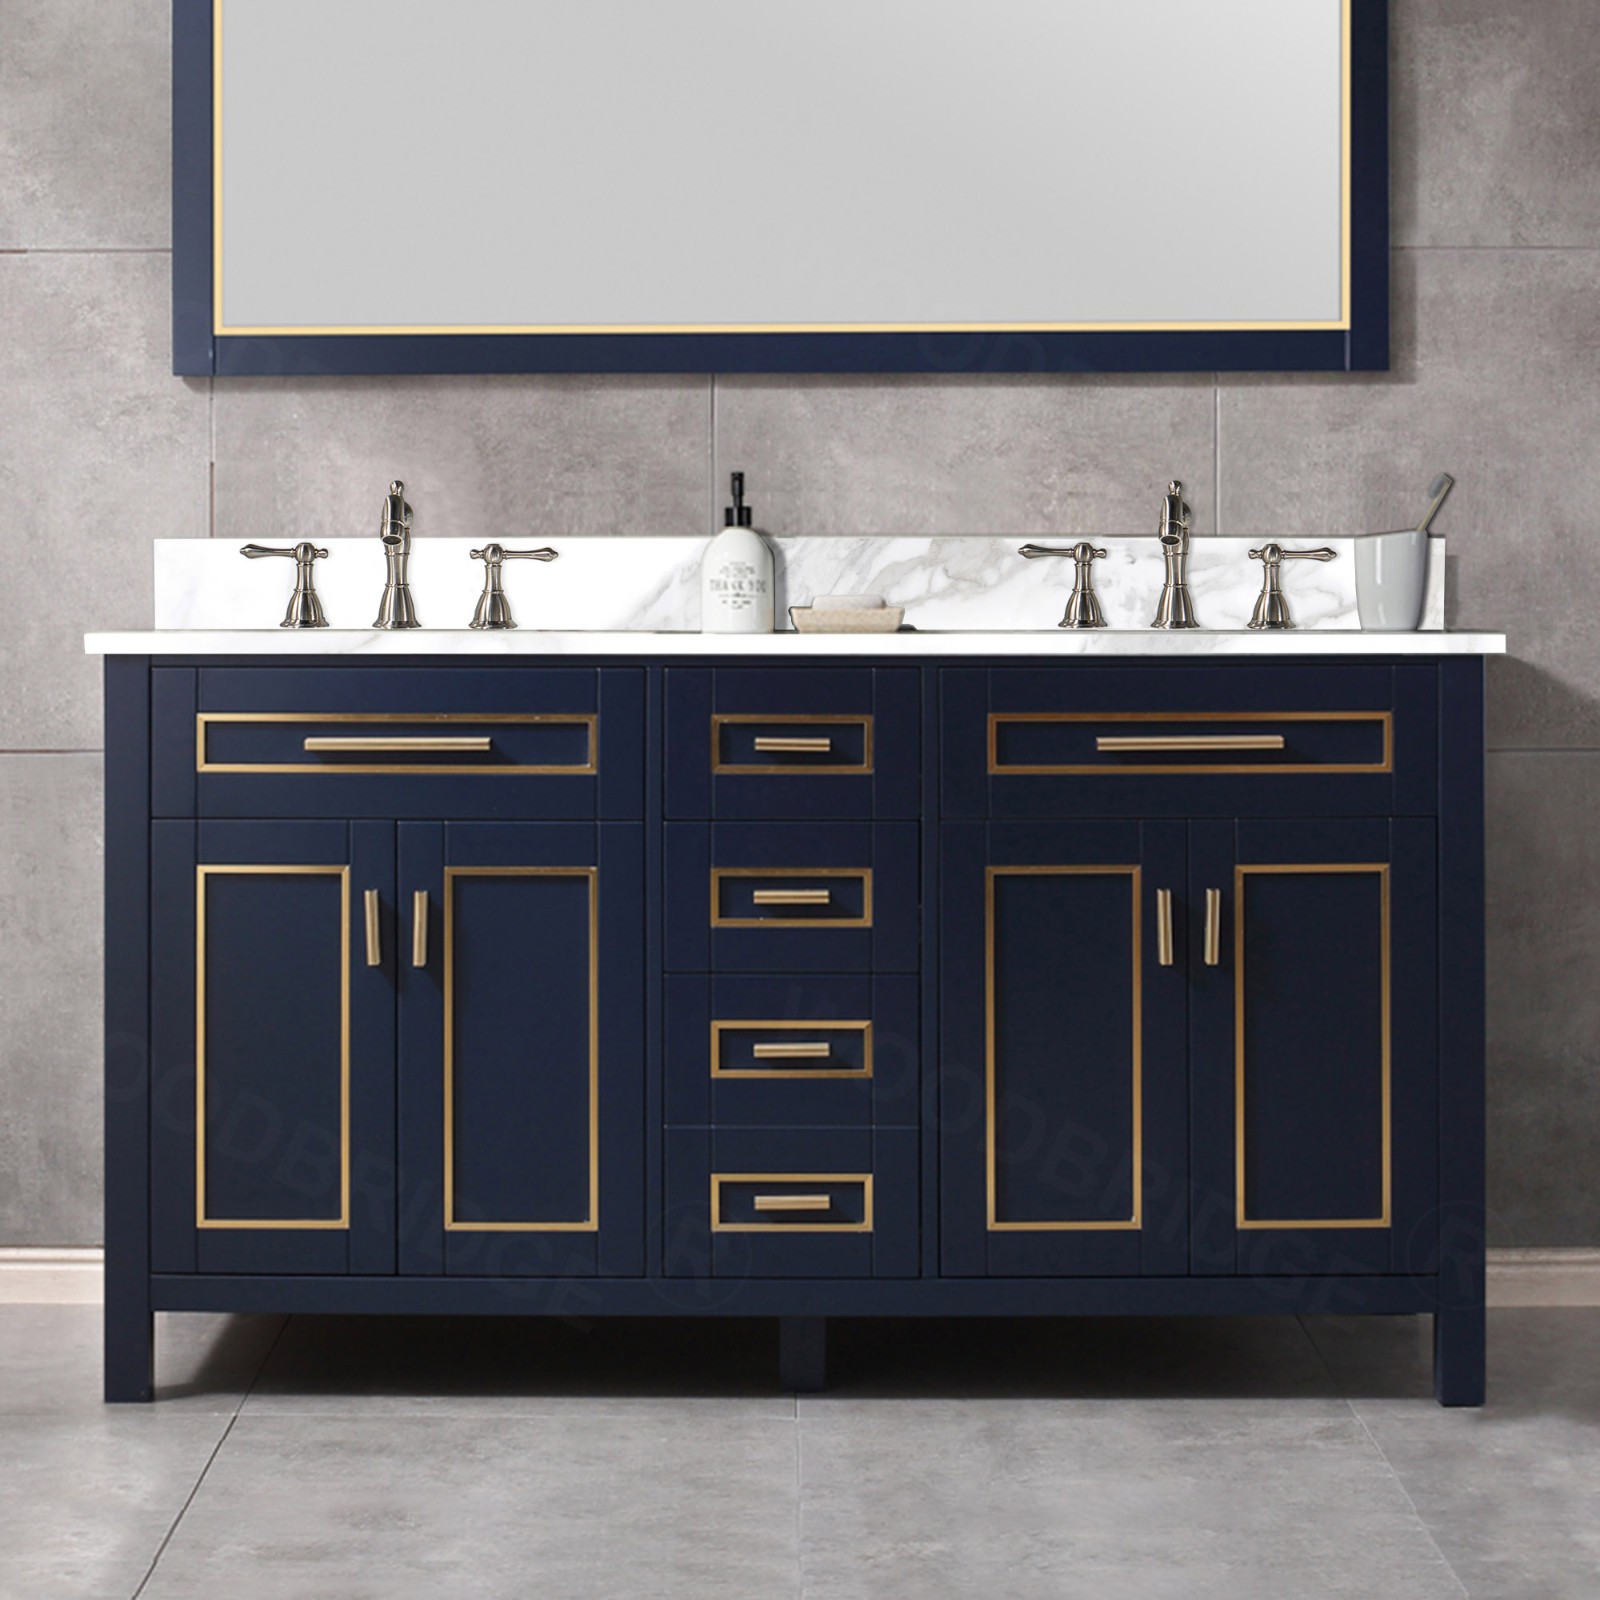  WOODBRIDGE Milan  61” Floor Mounted Single Basin Vanity Set with Solid Wood Cabinet in Navy Blue and Engineered stone composite Vanity Top in Fish Belly White with Pre-installed Undermount Rectangle Bathroom Sink and Pre-Drilled 3-Hole for 8” Widespread F_4632